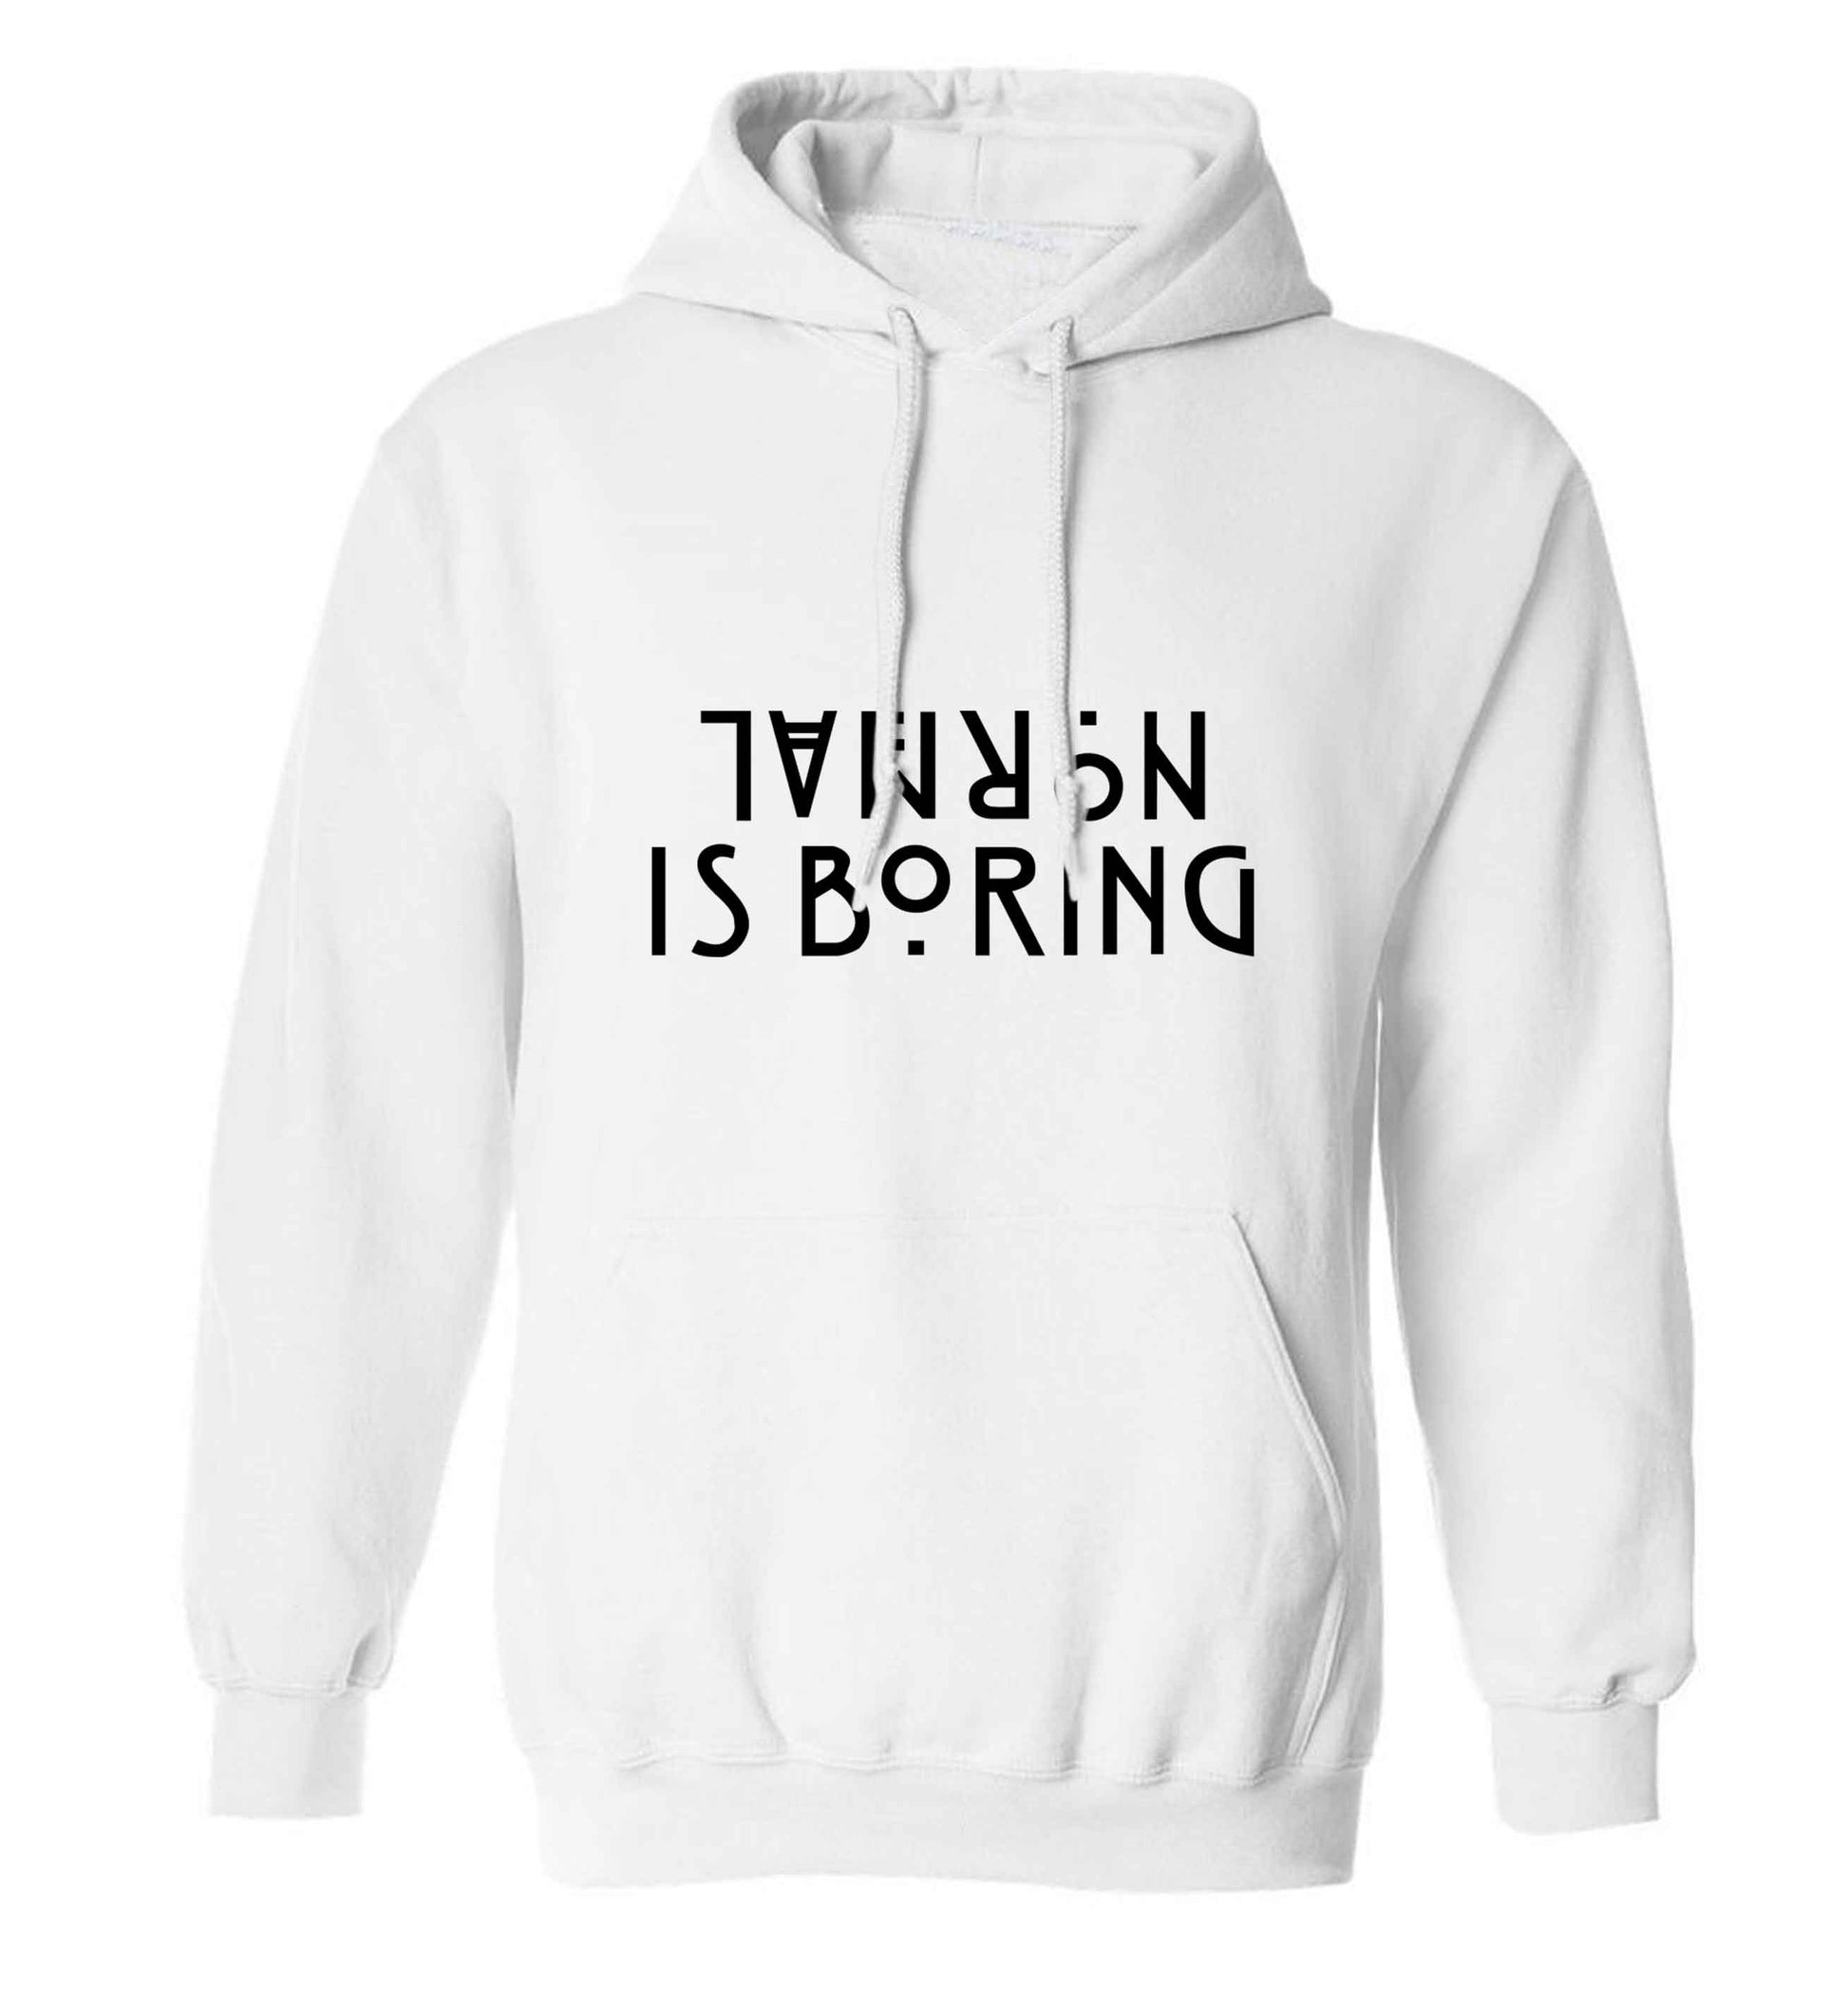 Normal is boring adults unisex white hoodie 2XL